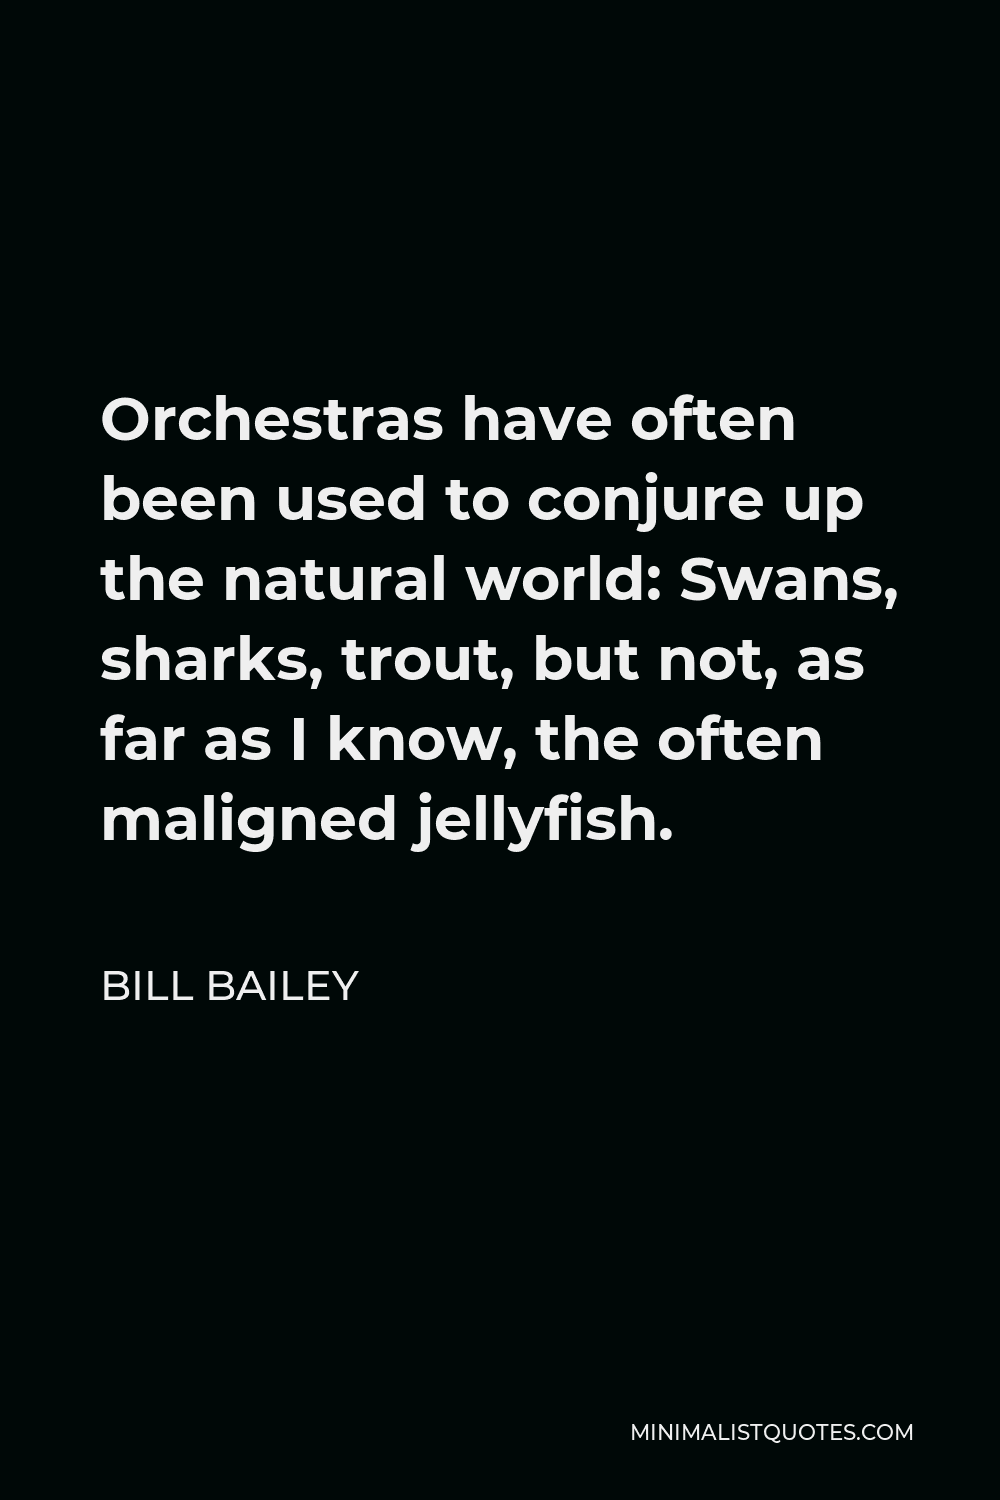 Bill Bailey Quote - Orchestras have often been used to conjure up the natural world: Swans, sharks, trout, but not, as far as I know, the often maligned jellyfish.